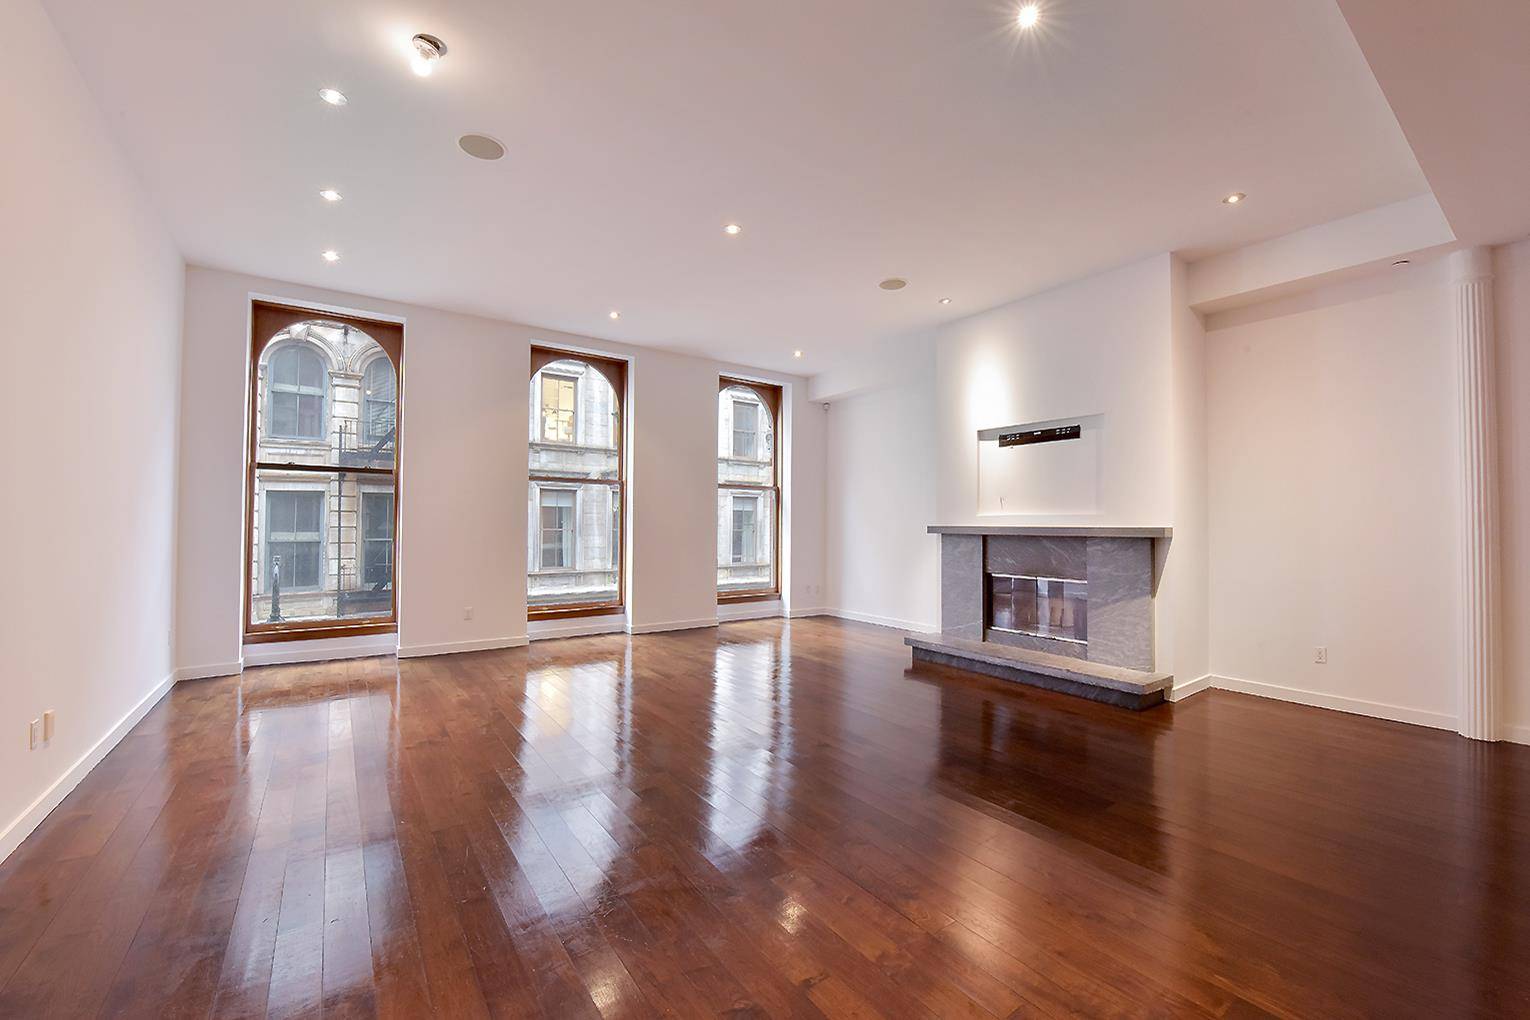 Improved Price Wonderful views of the historic cast iron lofts lining the cobblestone streets below, residence 2C at 22 Mercer Street is a sprawling condo loft home of nearly 2, ...